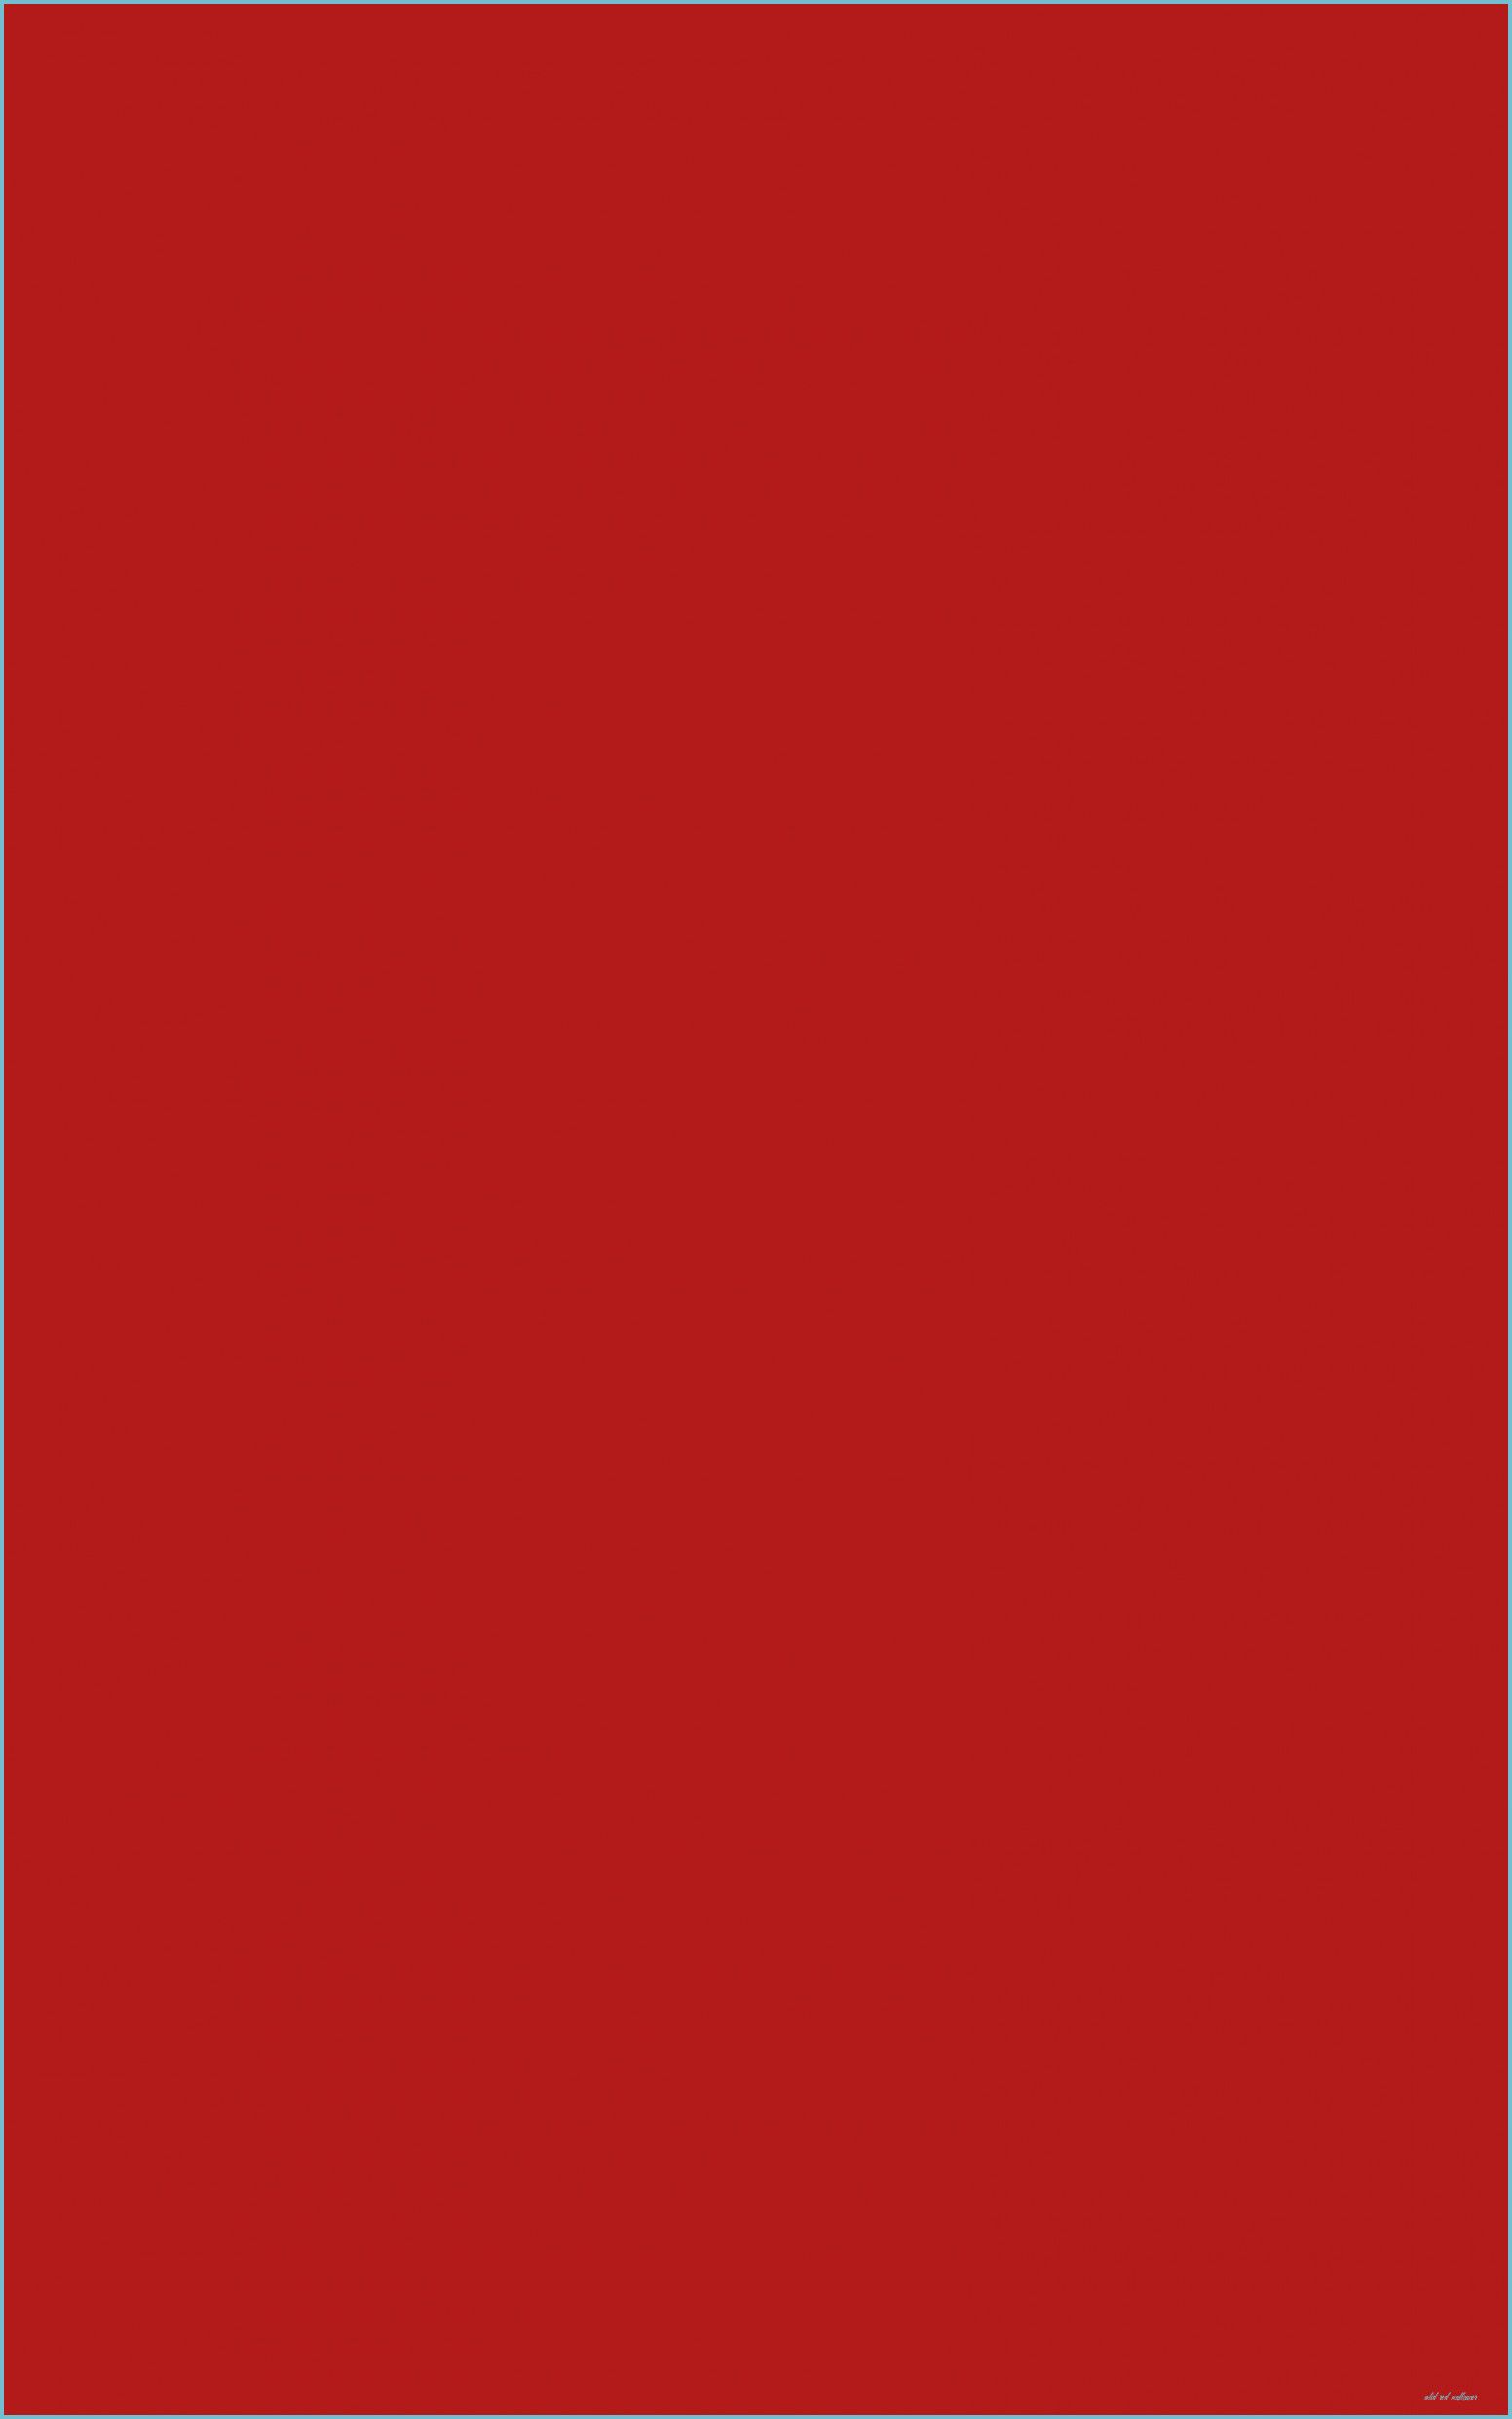 Red Background iPhone Wallpaper Red paint colors, Solid color red wallpaper